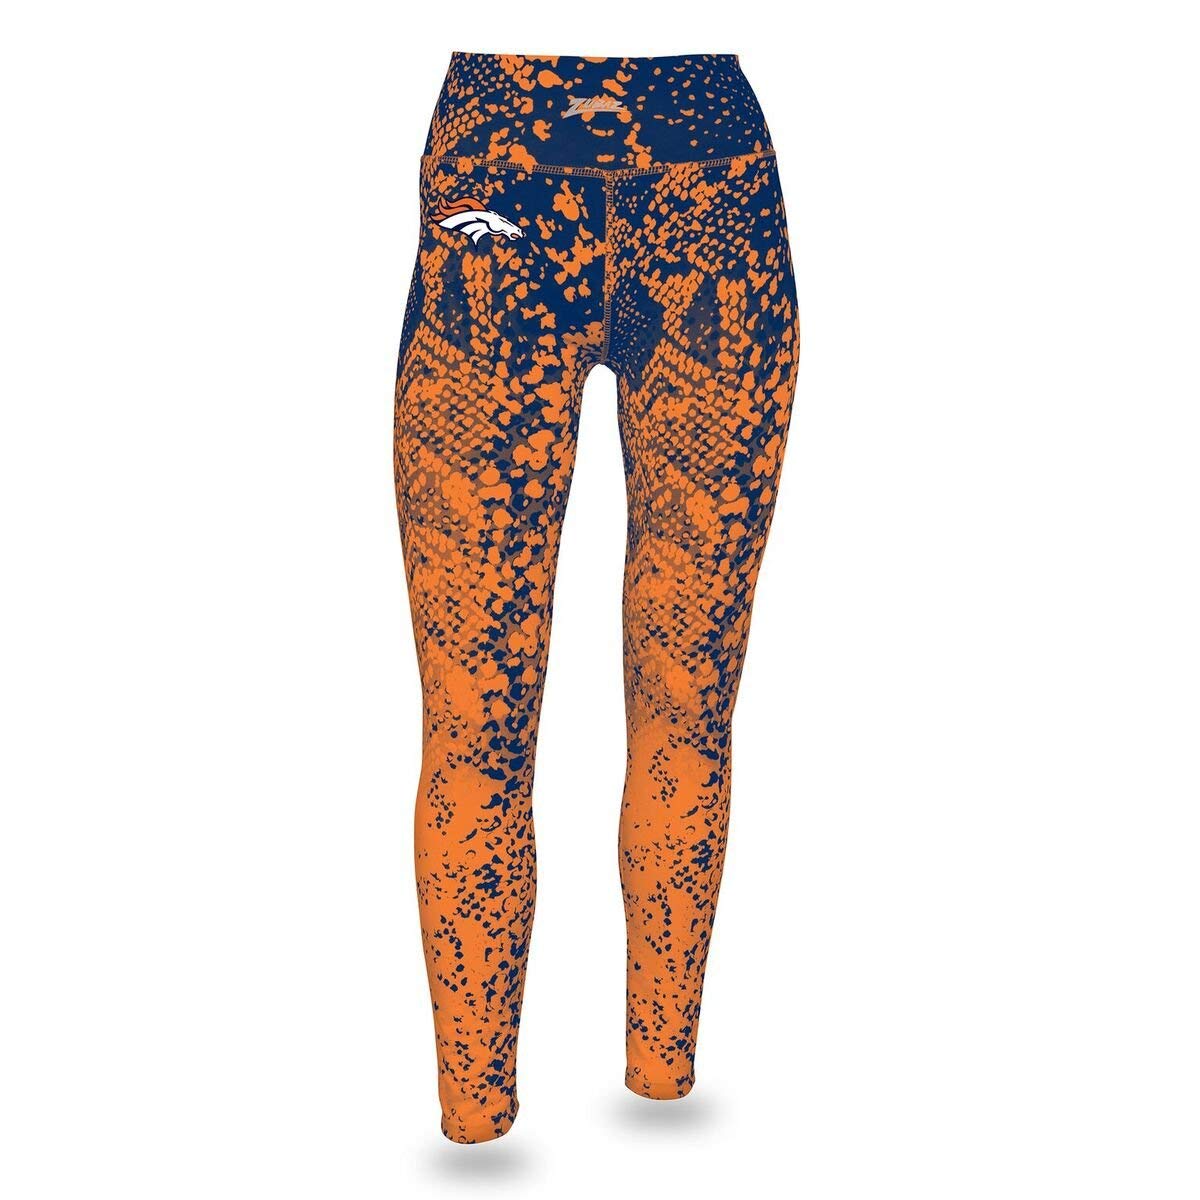 Cowboy Leggings For Sale | International Society of Precision Agriculture